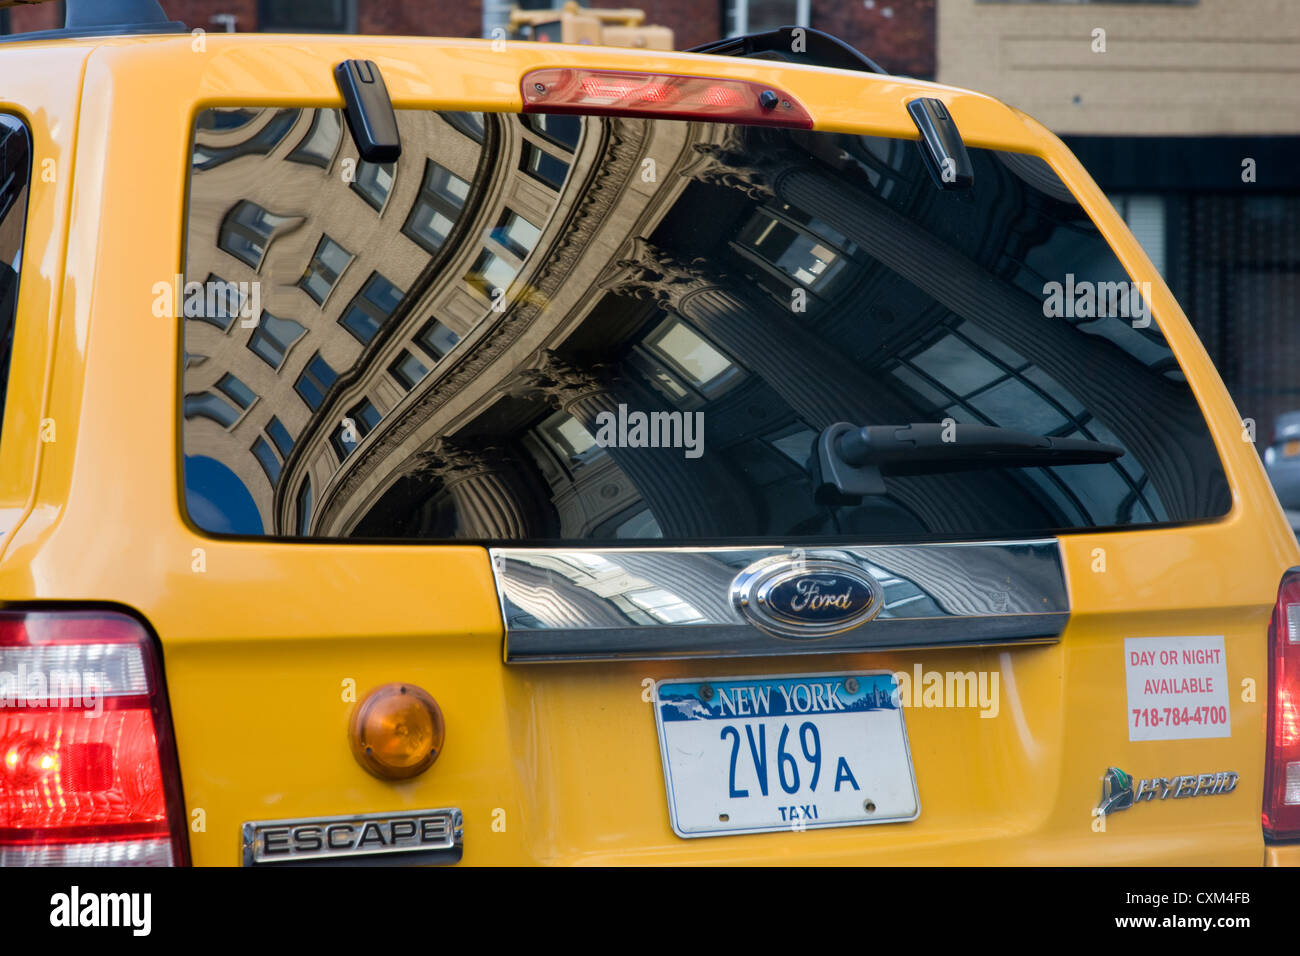 Building refelected in the back windscreen of a New York yellow cab Stock Photo